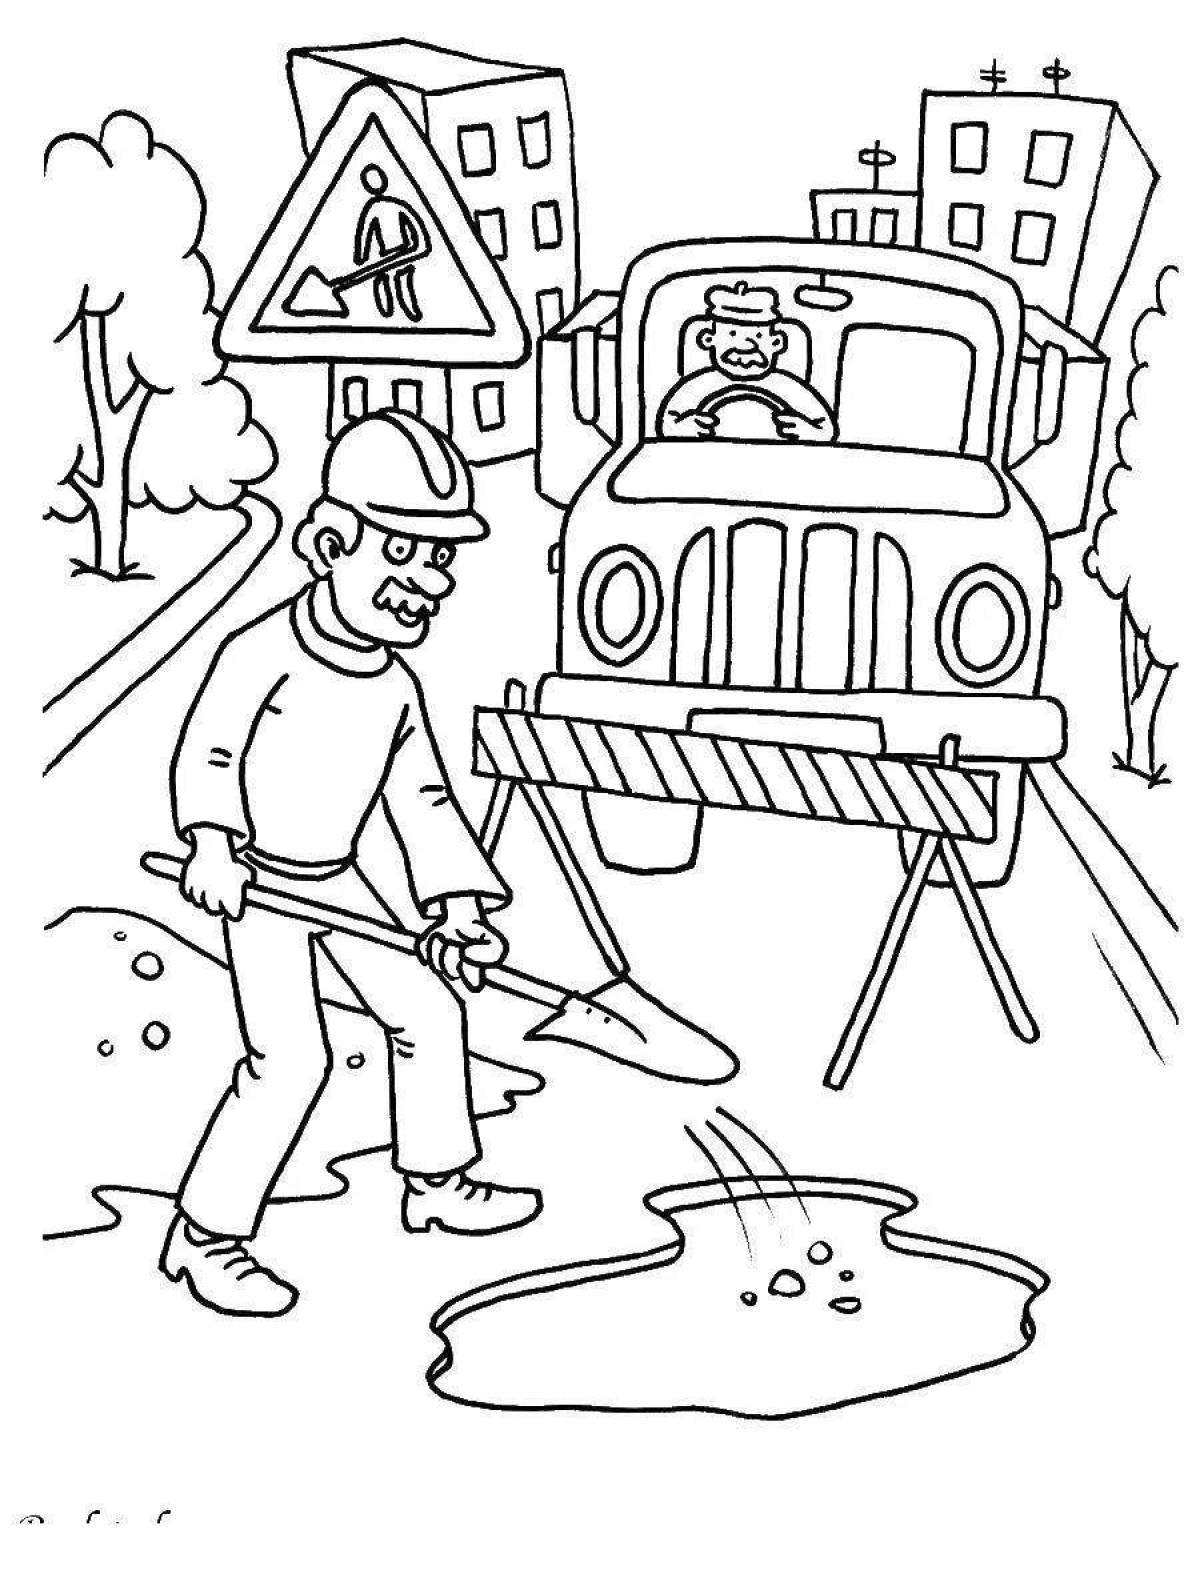 Coloring pages of my dad and me for safer roads